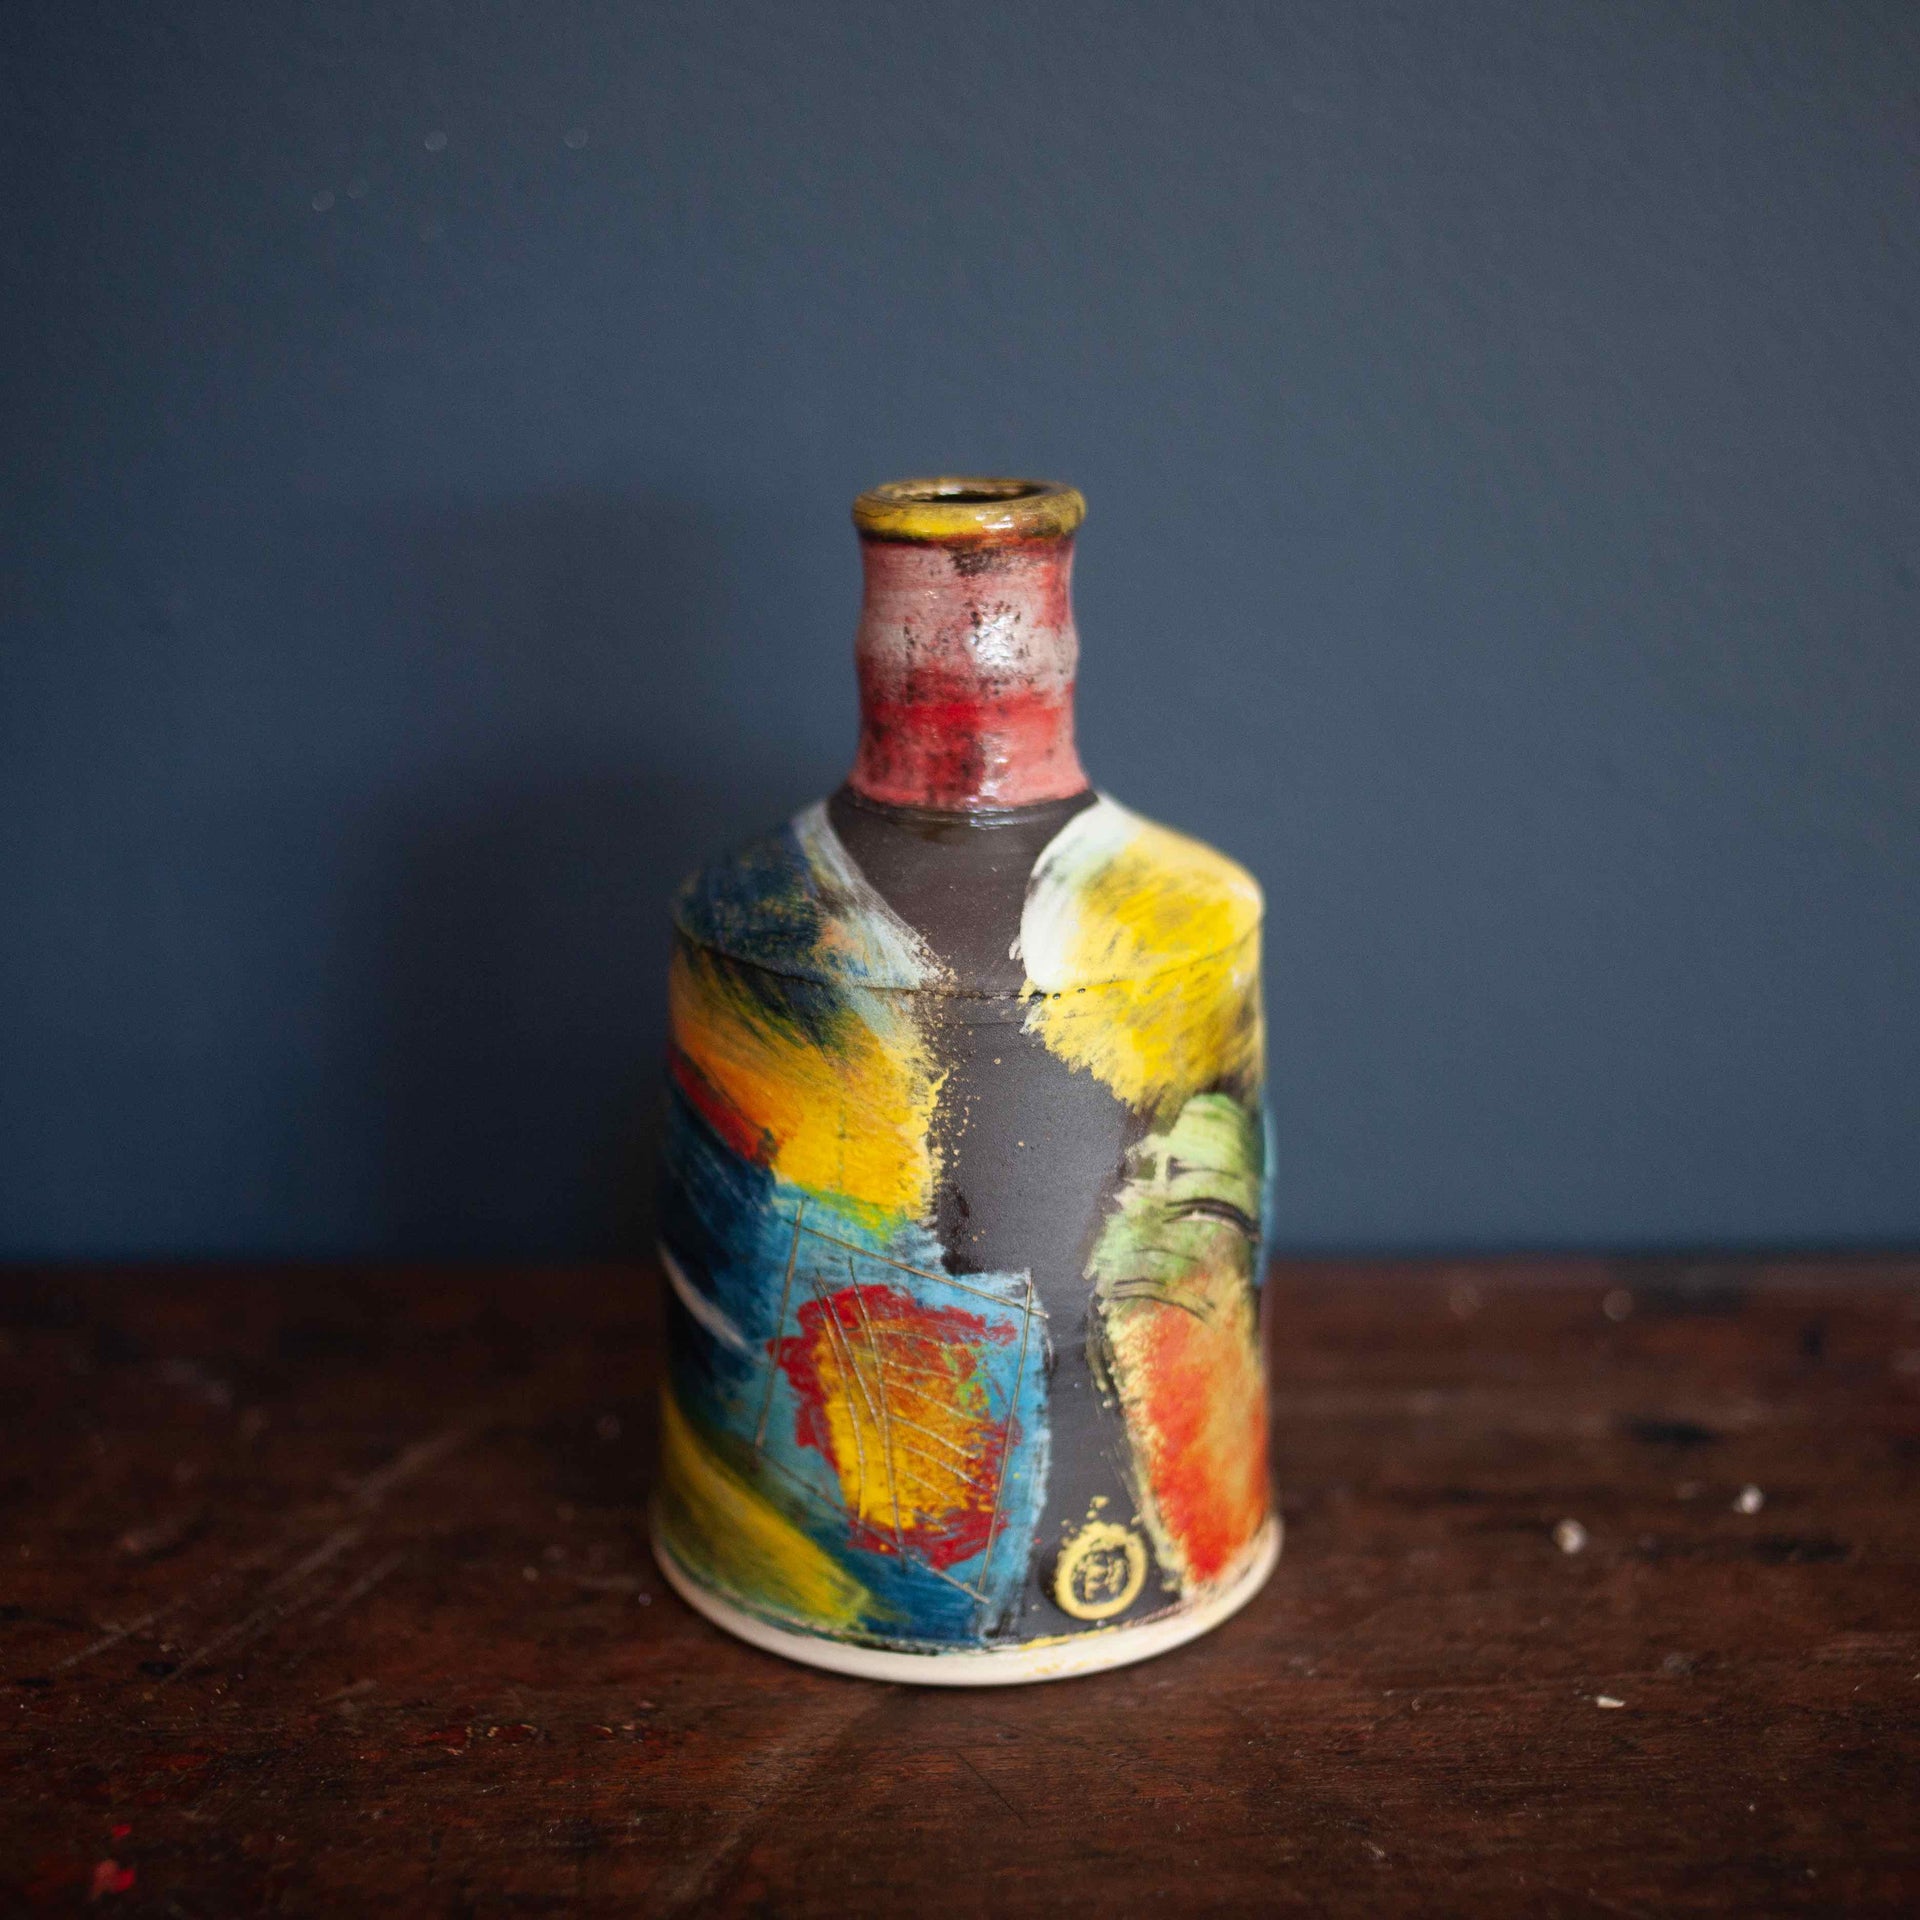 Colourful bottle made of pottery by John Pollex